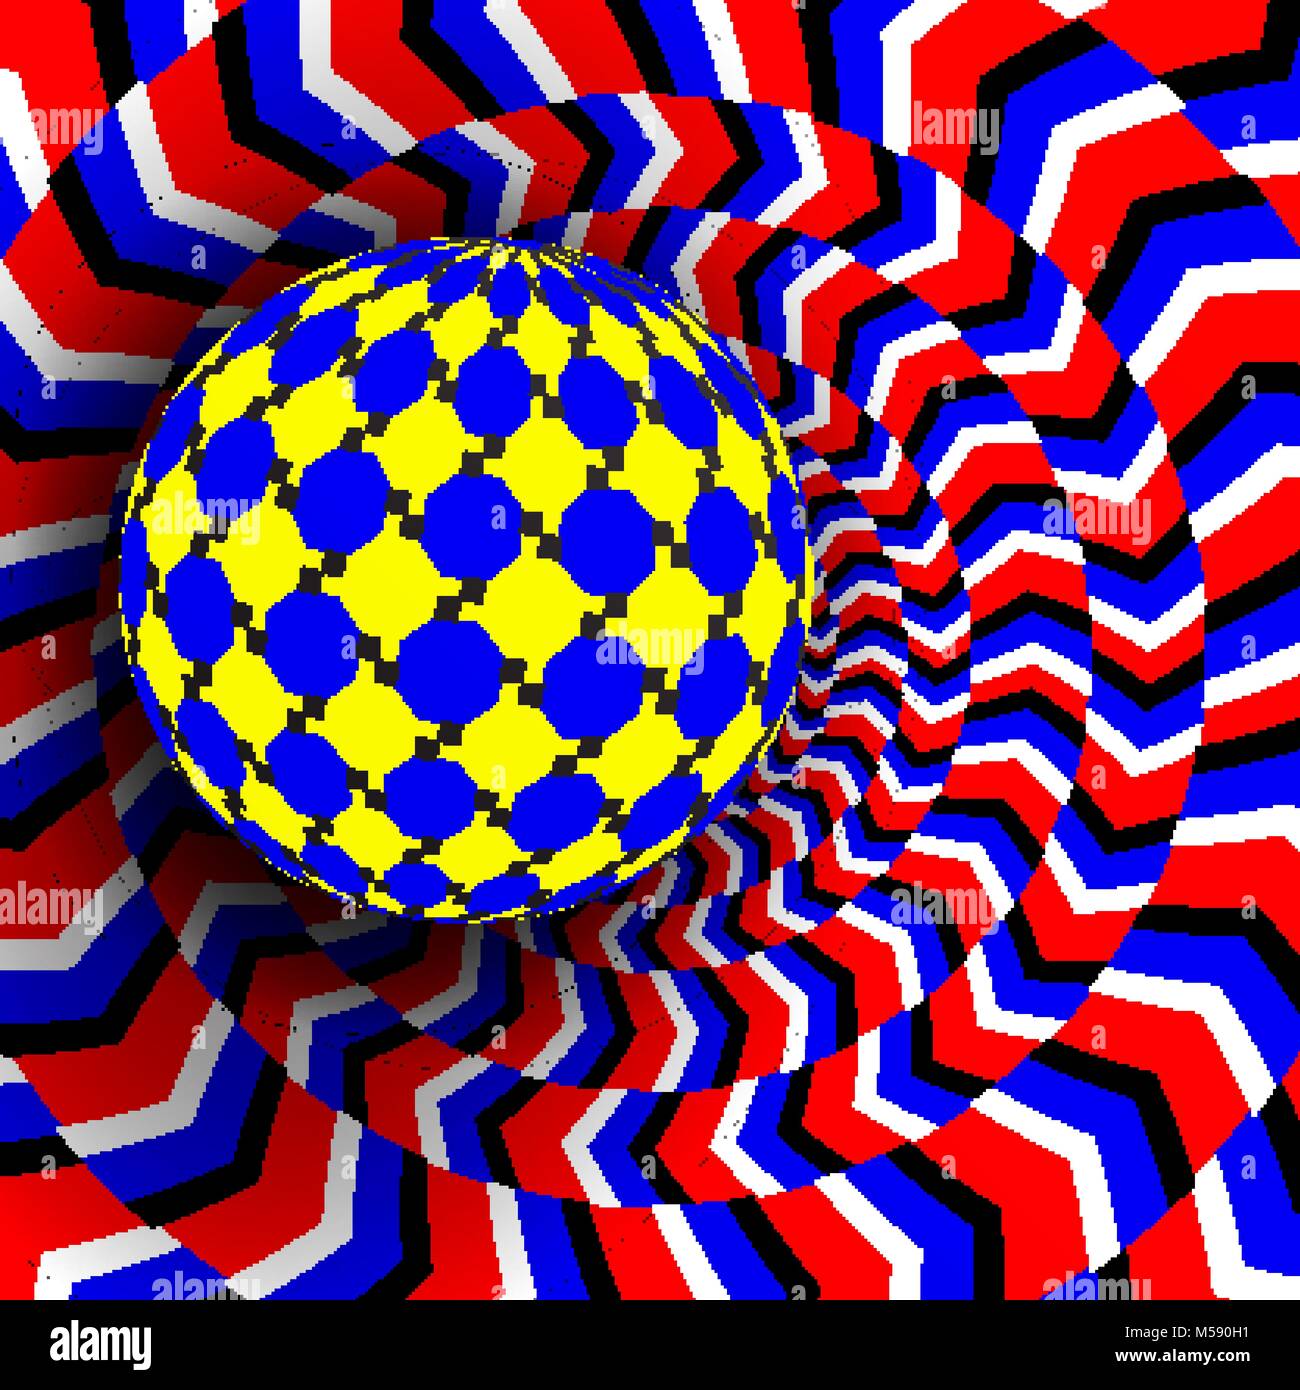 trippy moving illusions